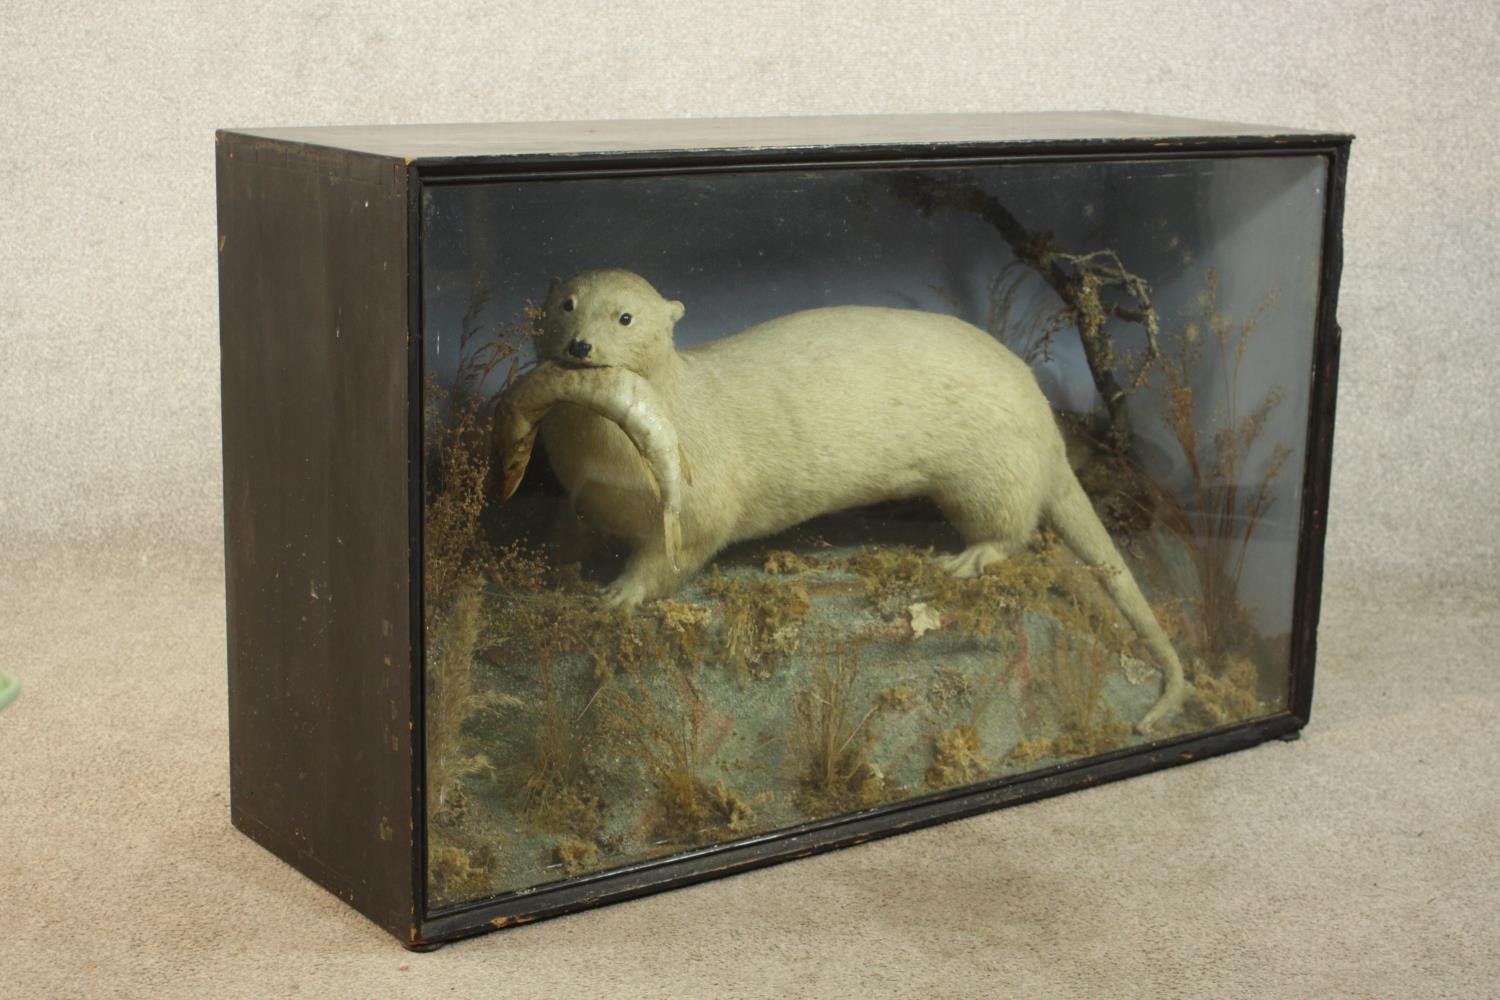 A 19th century cased taxidermy white otter with a fish in its mouth set in a naturalistic setting. - Image 5 of 6